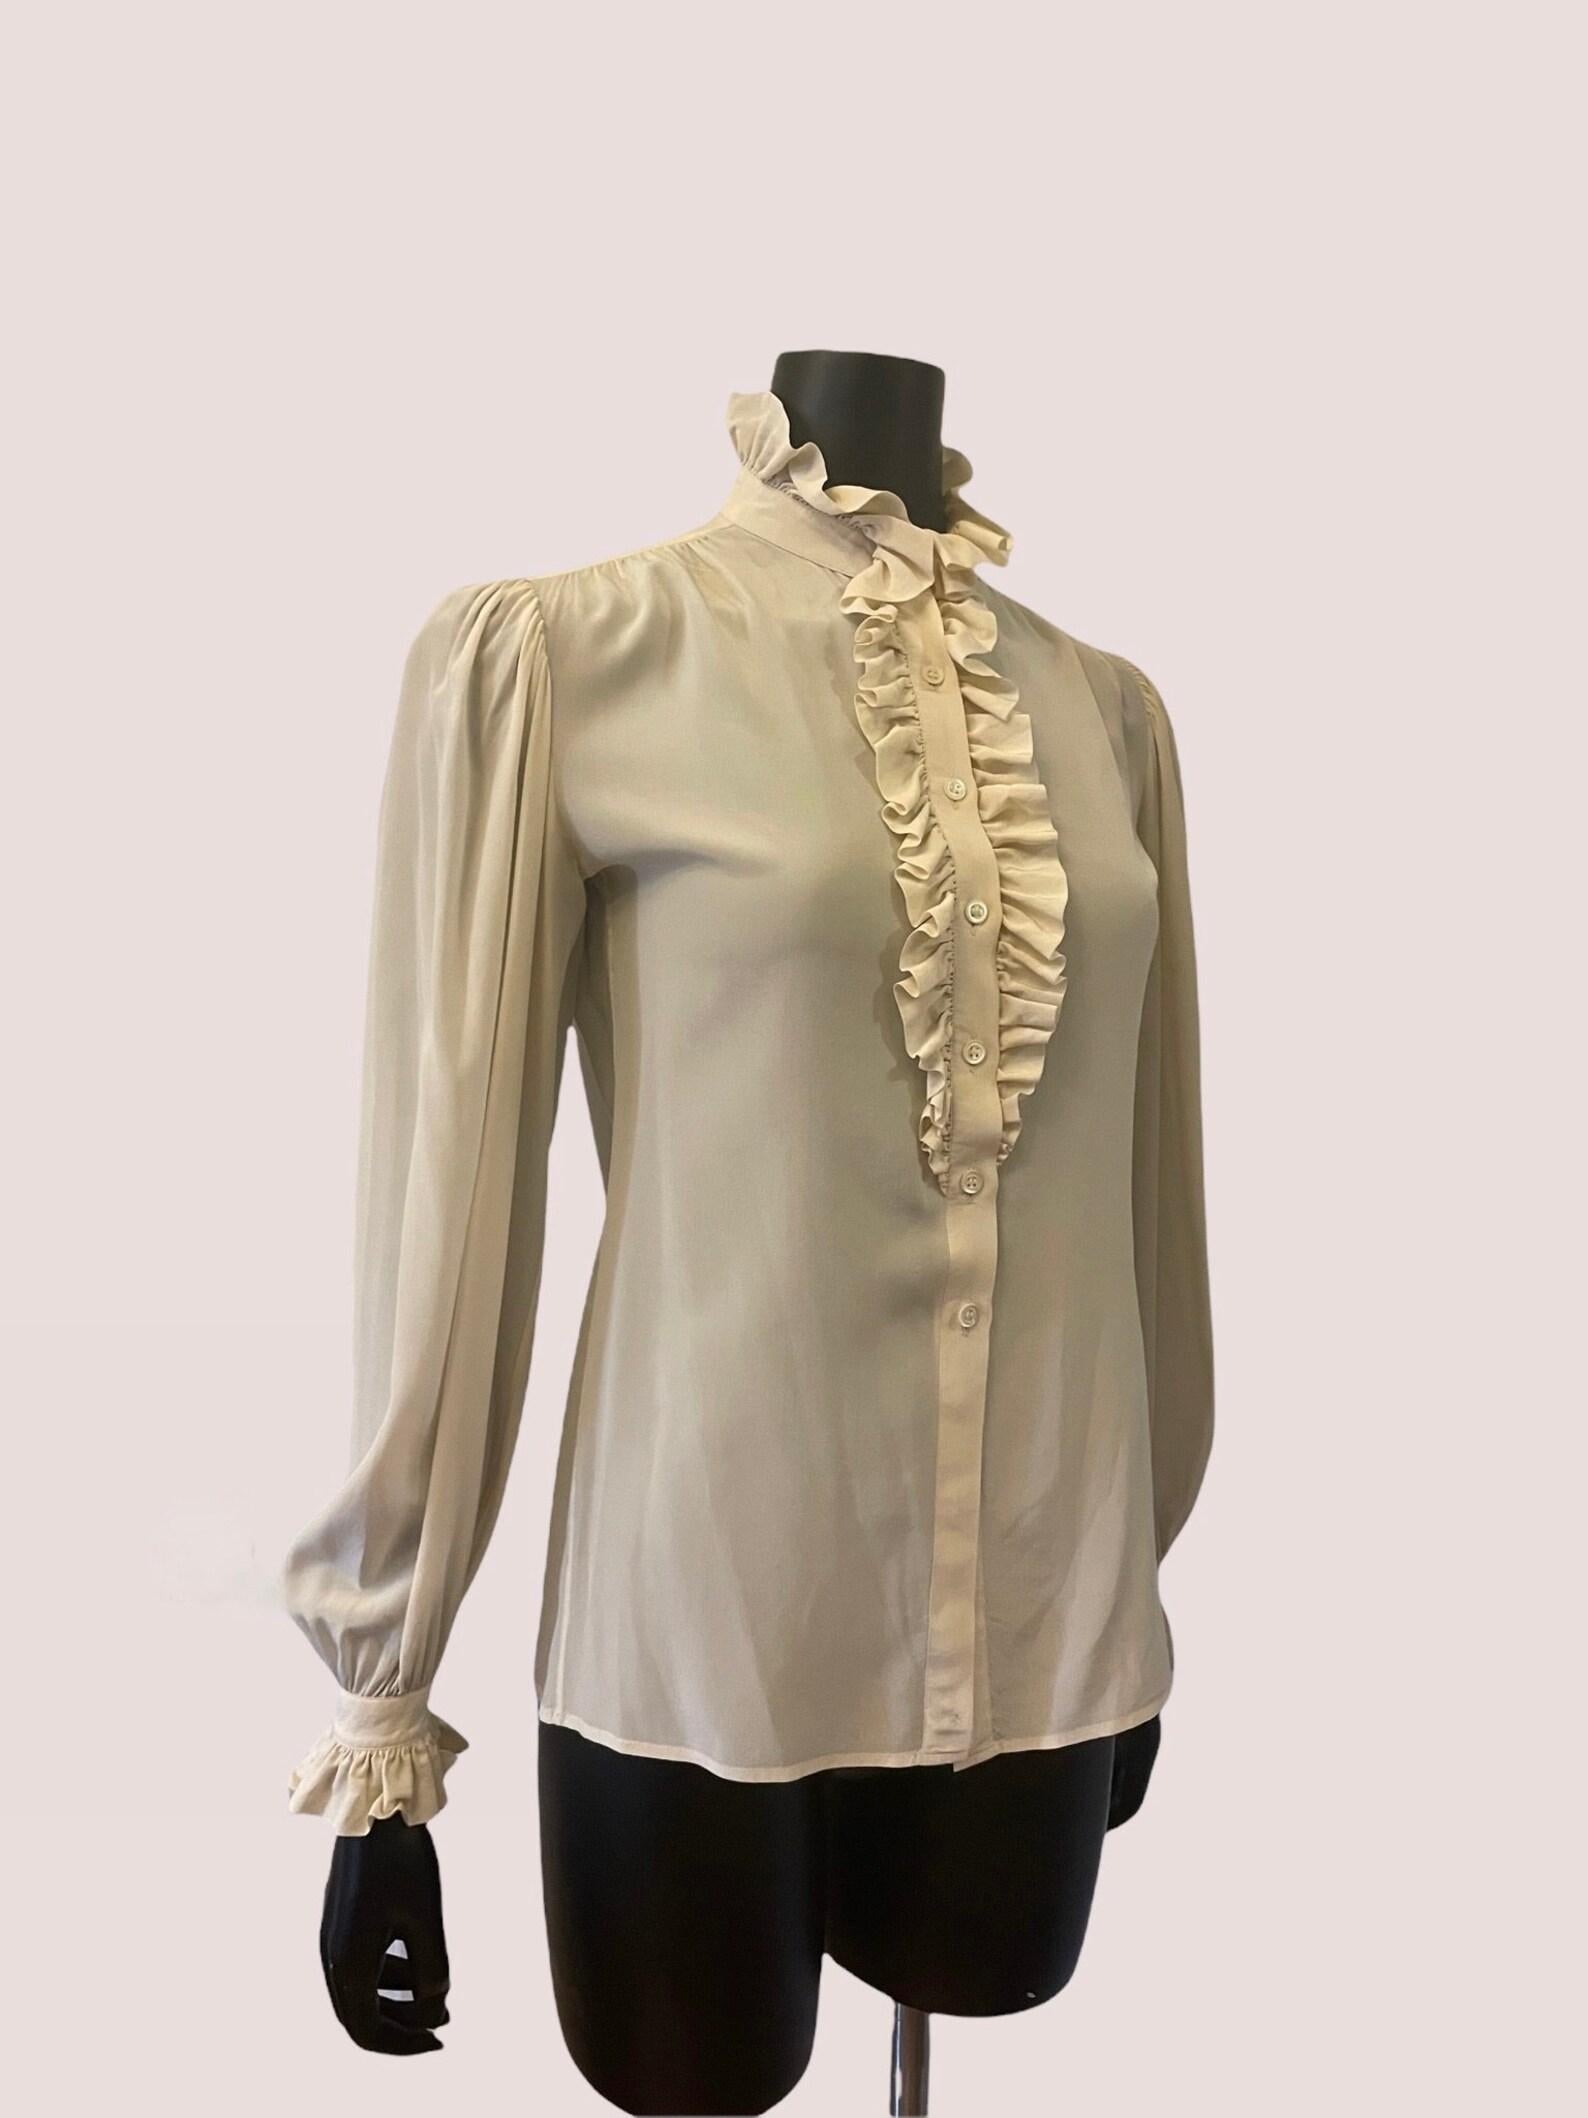 Yves Saint Laurent Bone Beige Silk Blouse, Circa 1970s In Excellent Condition For Sale In Brooklyn, NY